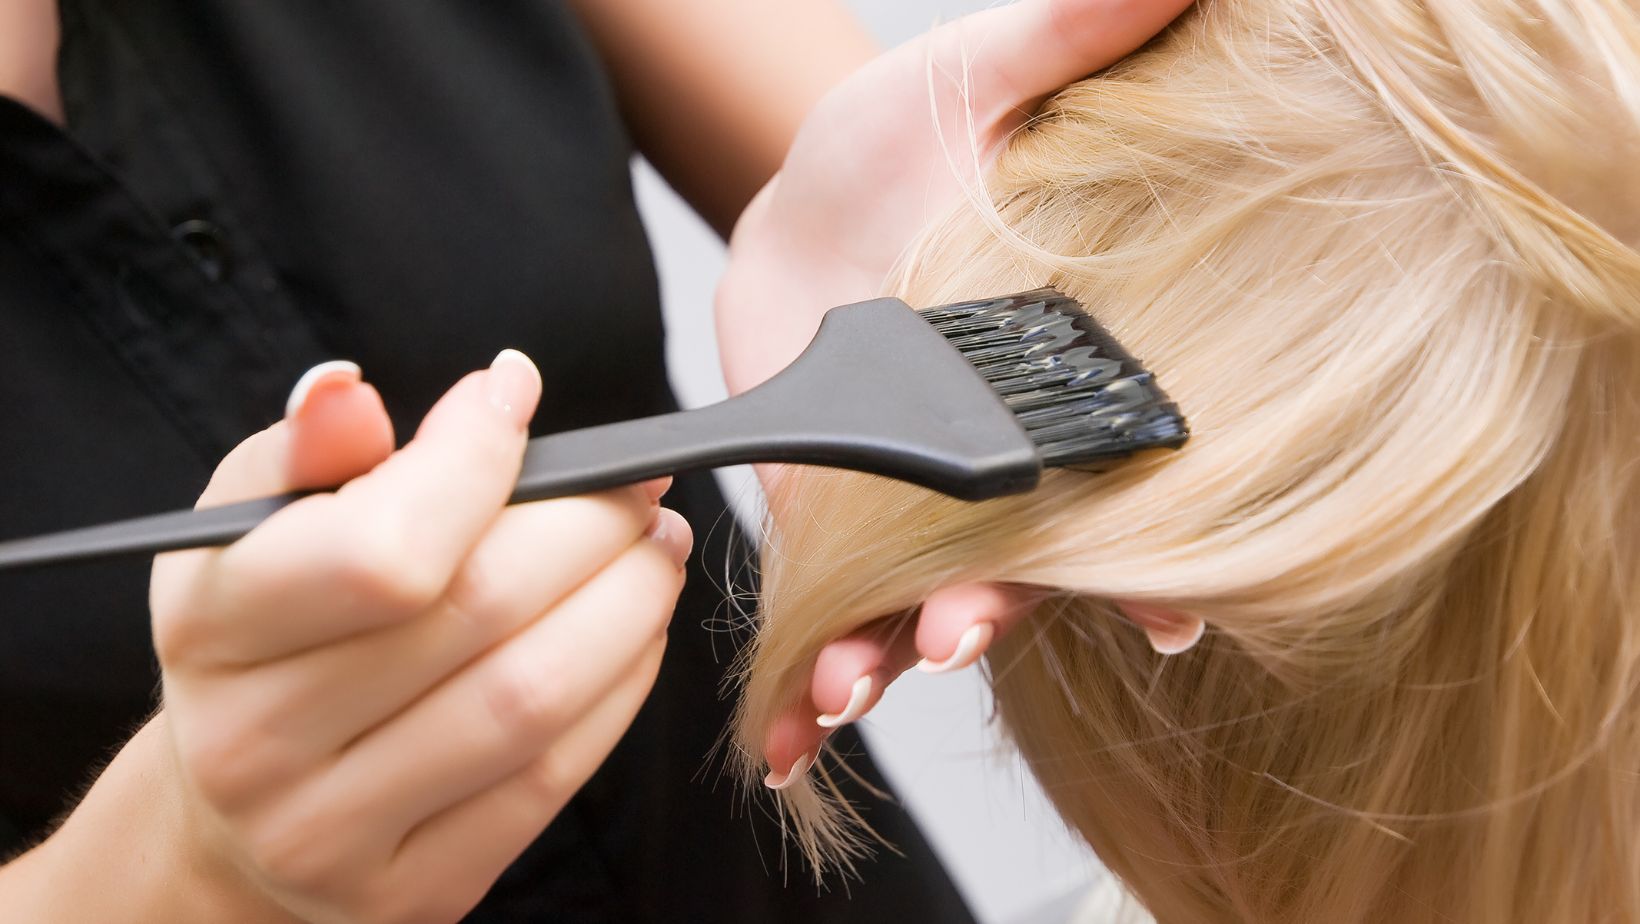 6 Warning Signs Your Stylist Isn’t Taking Enough Time With You